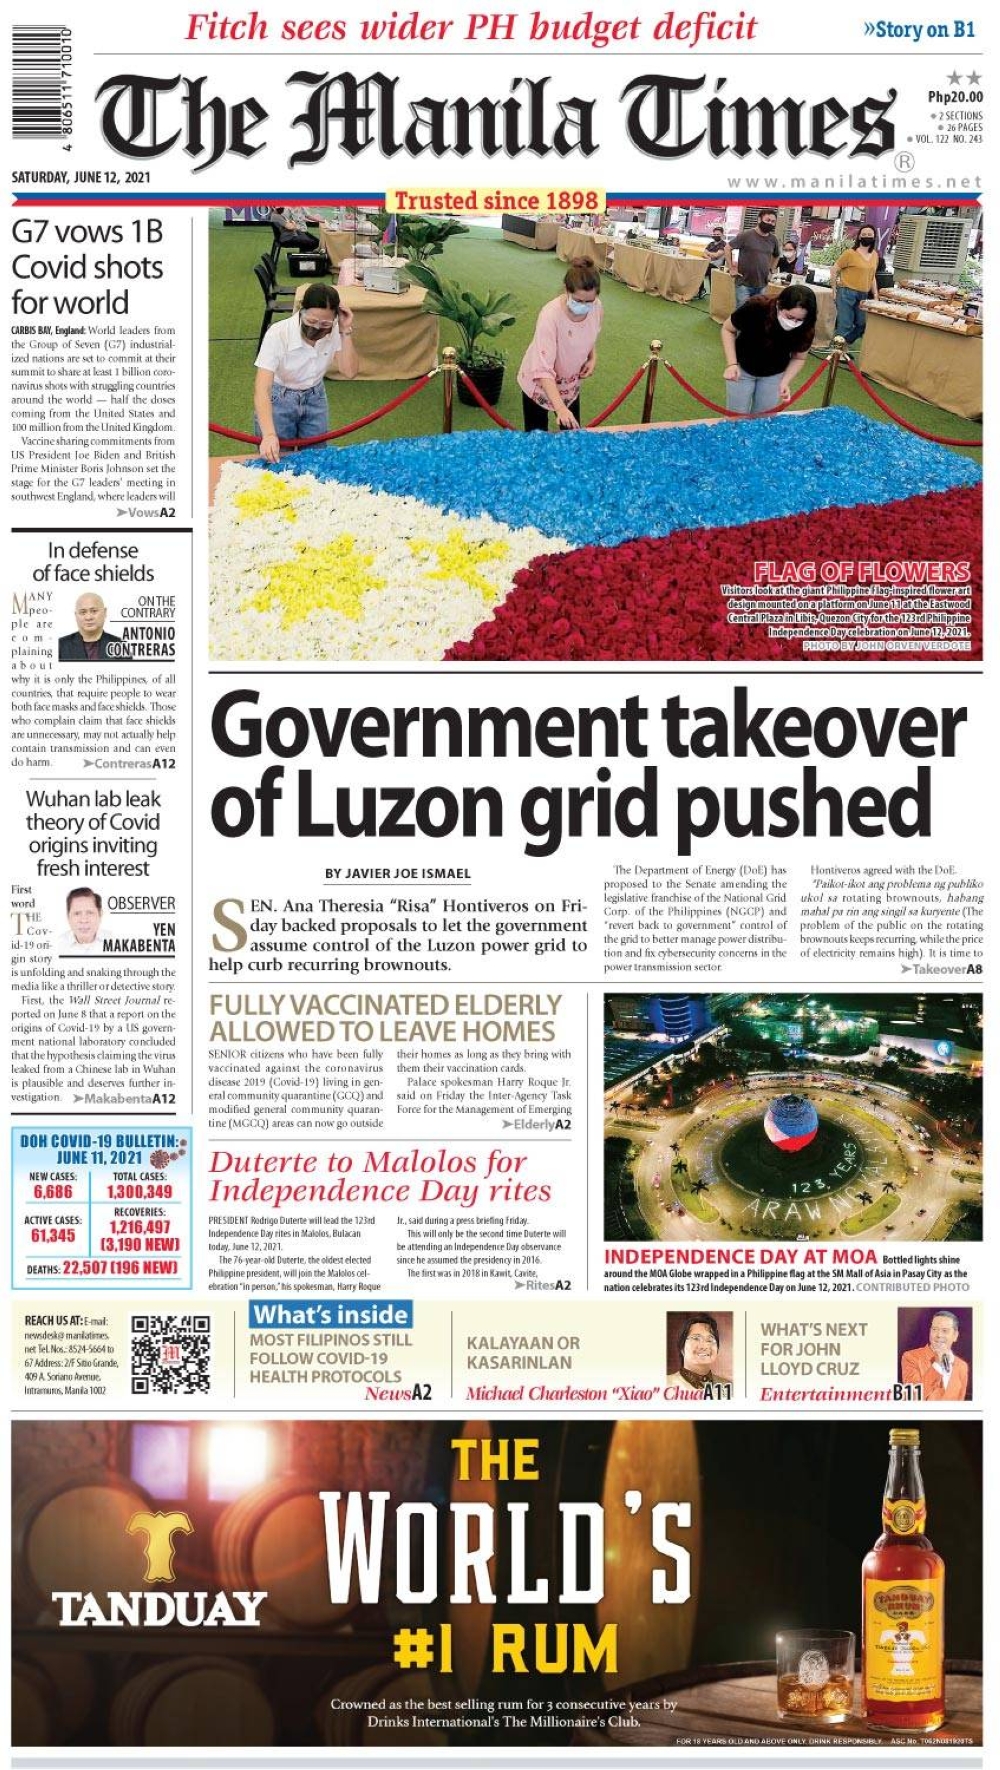 Today S Front Page June 12 21 The Manila Times